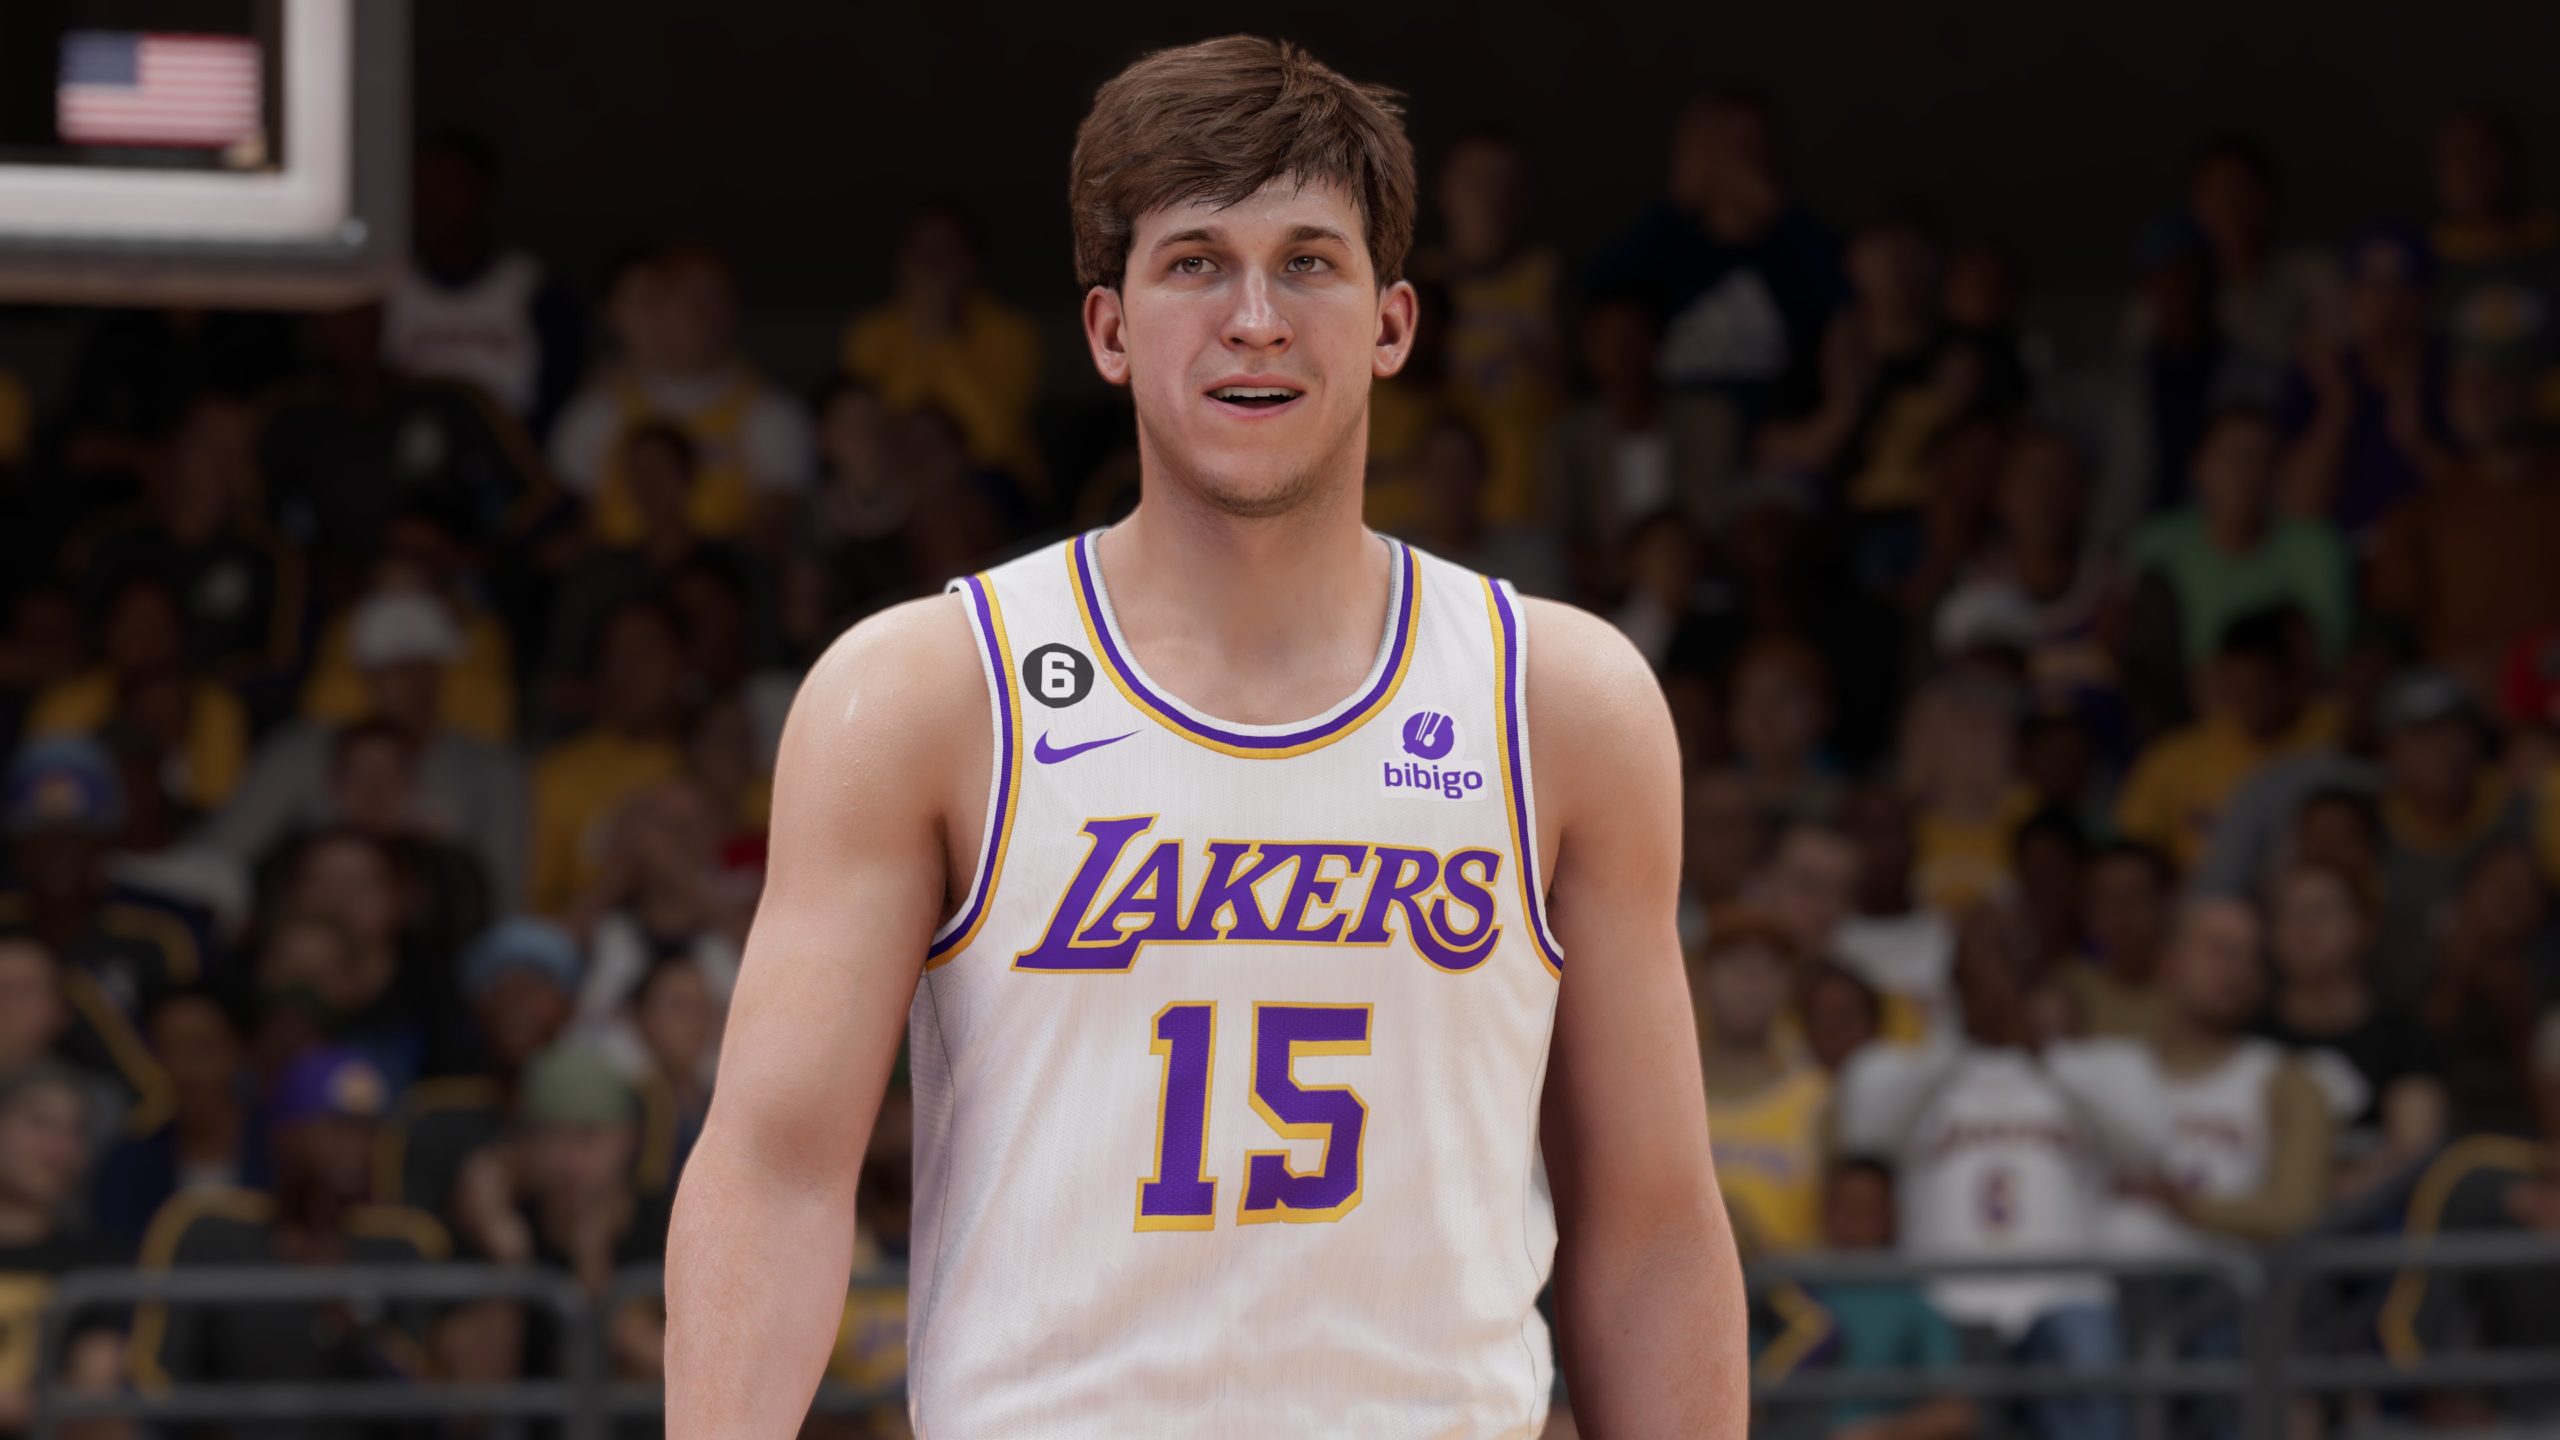 The most important patch in NBA 2K history Austin Reaves finally got